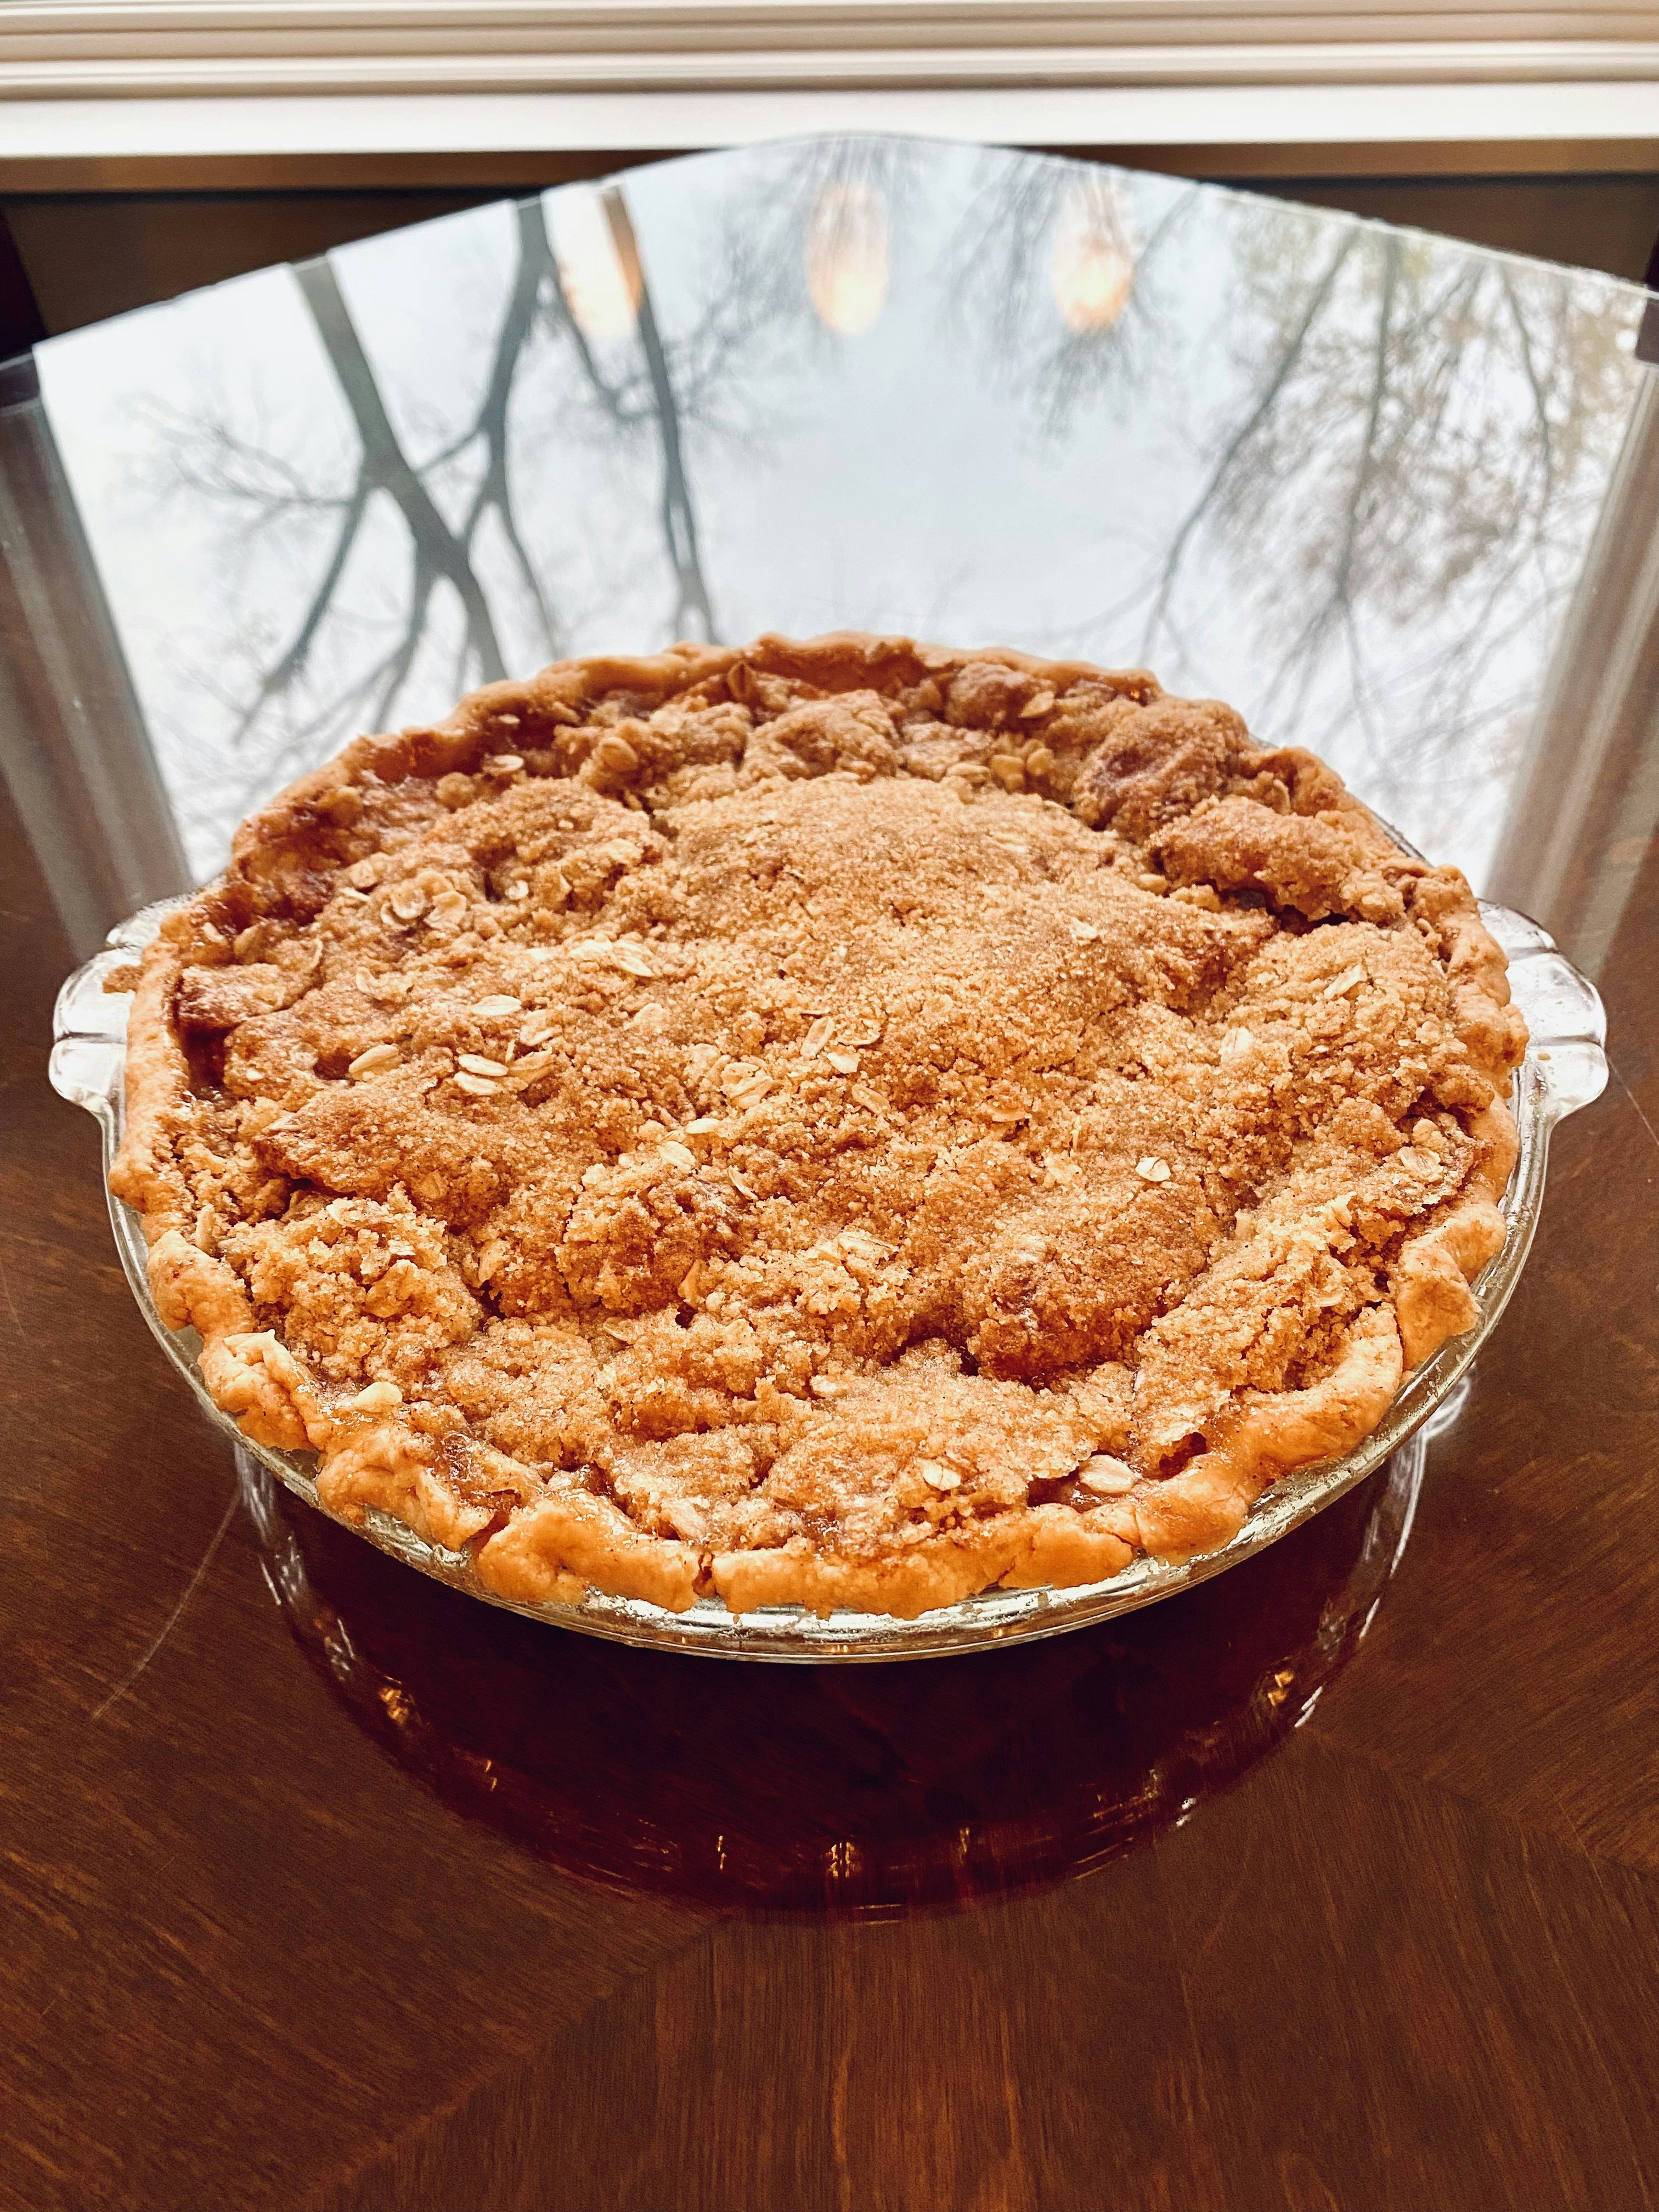 iPhone photo of Mom’s homemade apple pie on glass table for our thanksgiving day feast with trees and sky background in reflection